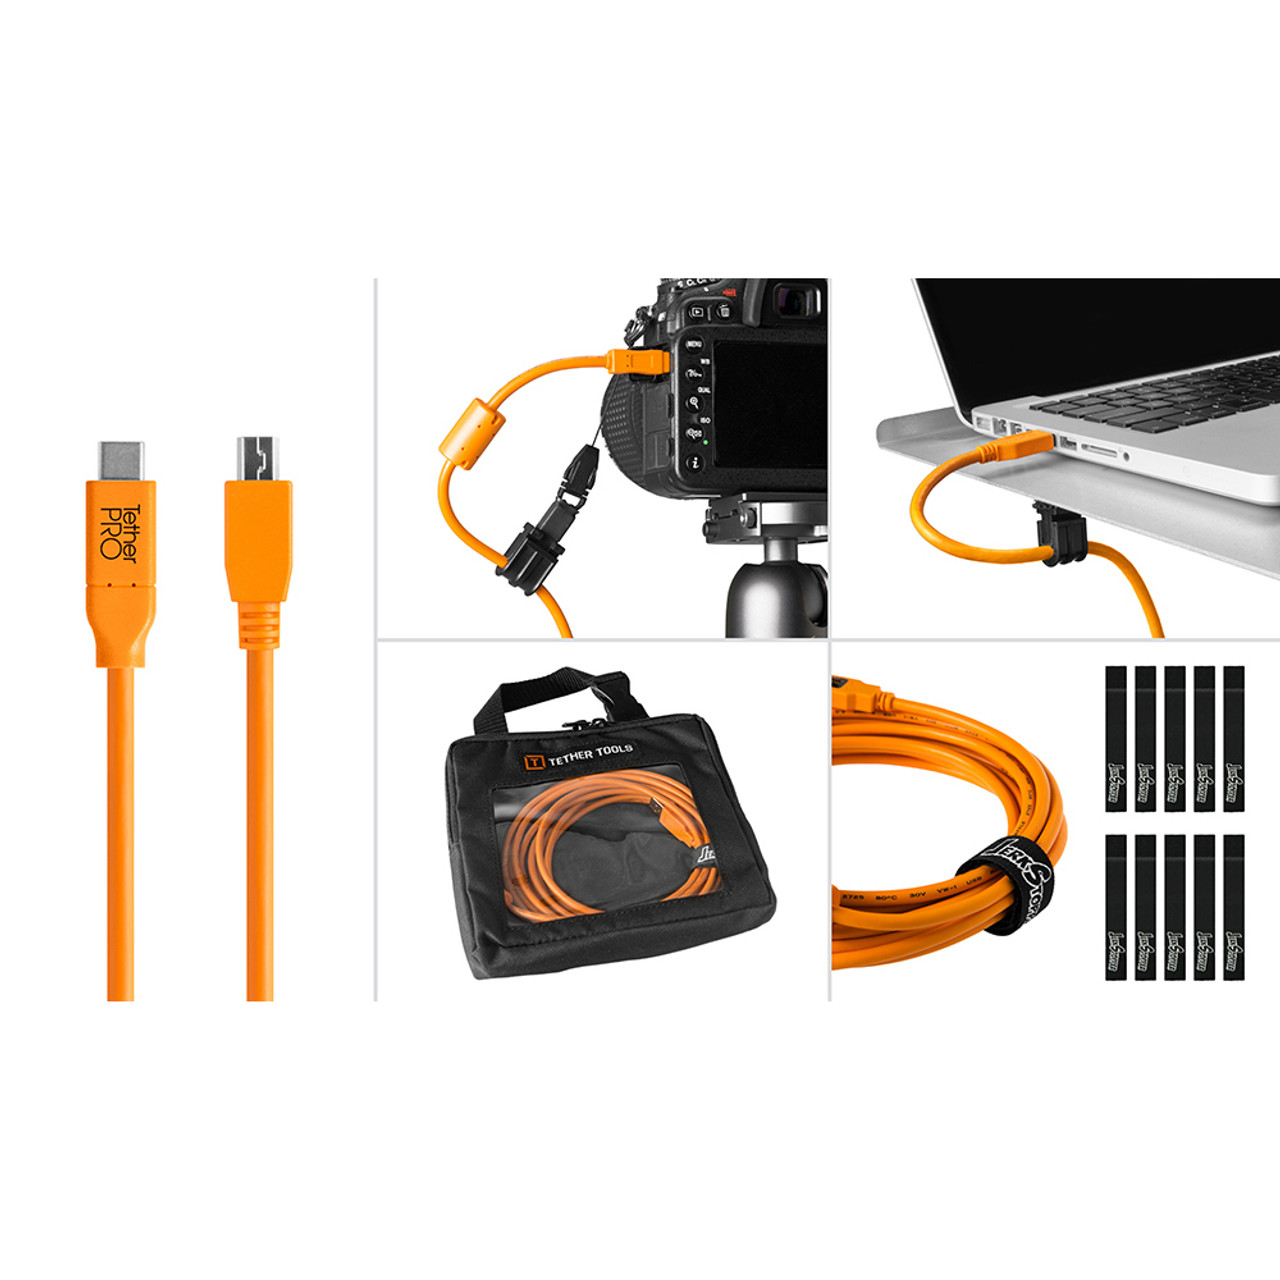 TETHER TOOLS STARTER TETHERING KIT WITH USB 2.0 TYPE-A TO MICRO-B 5-PIN CABLE (15' - ORANGE)